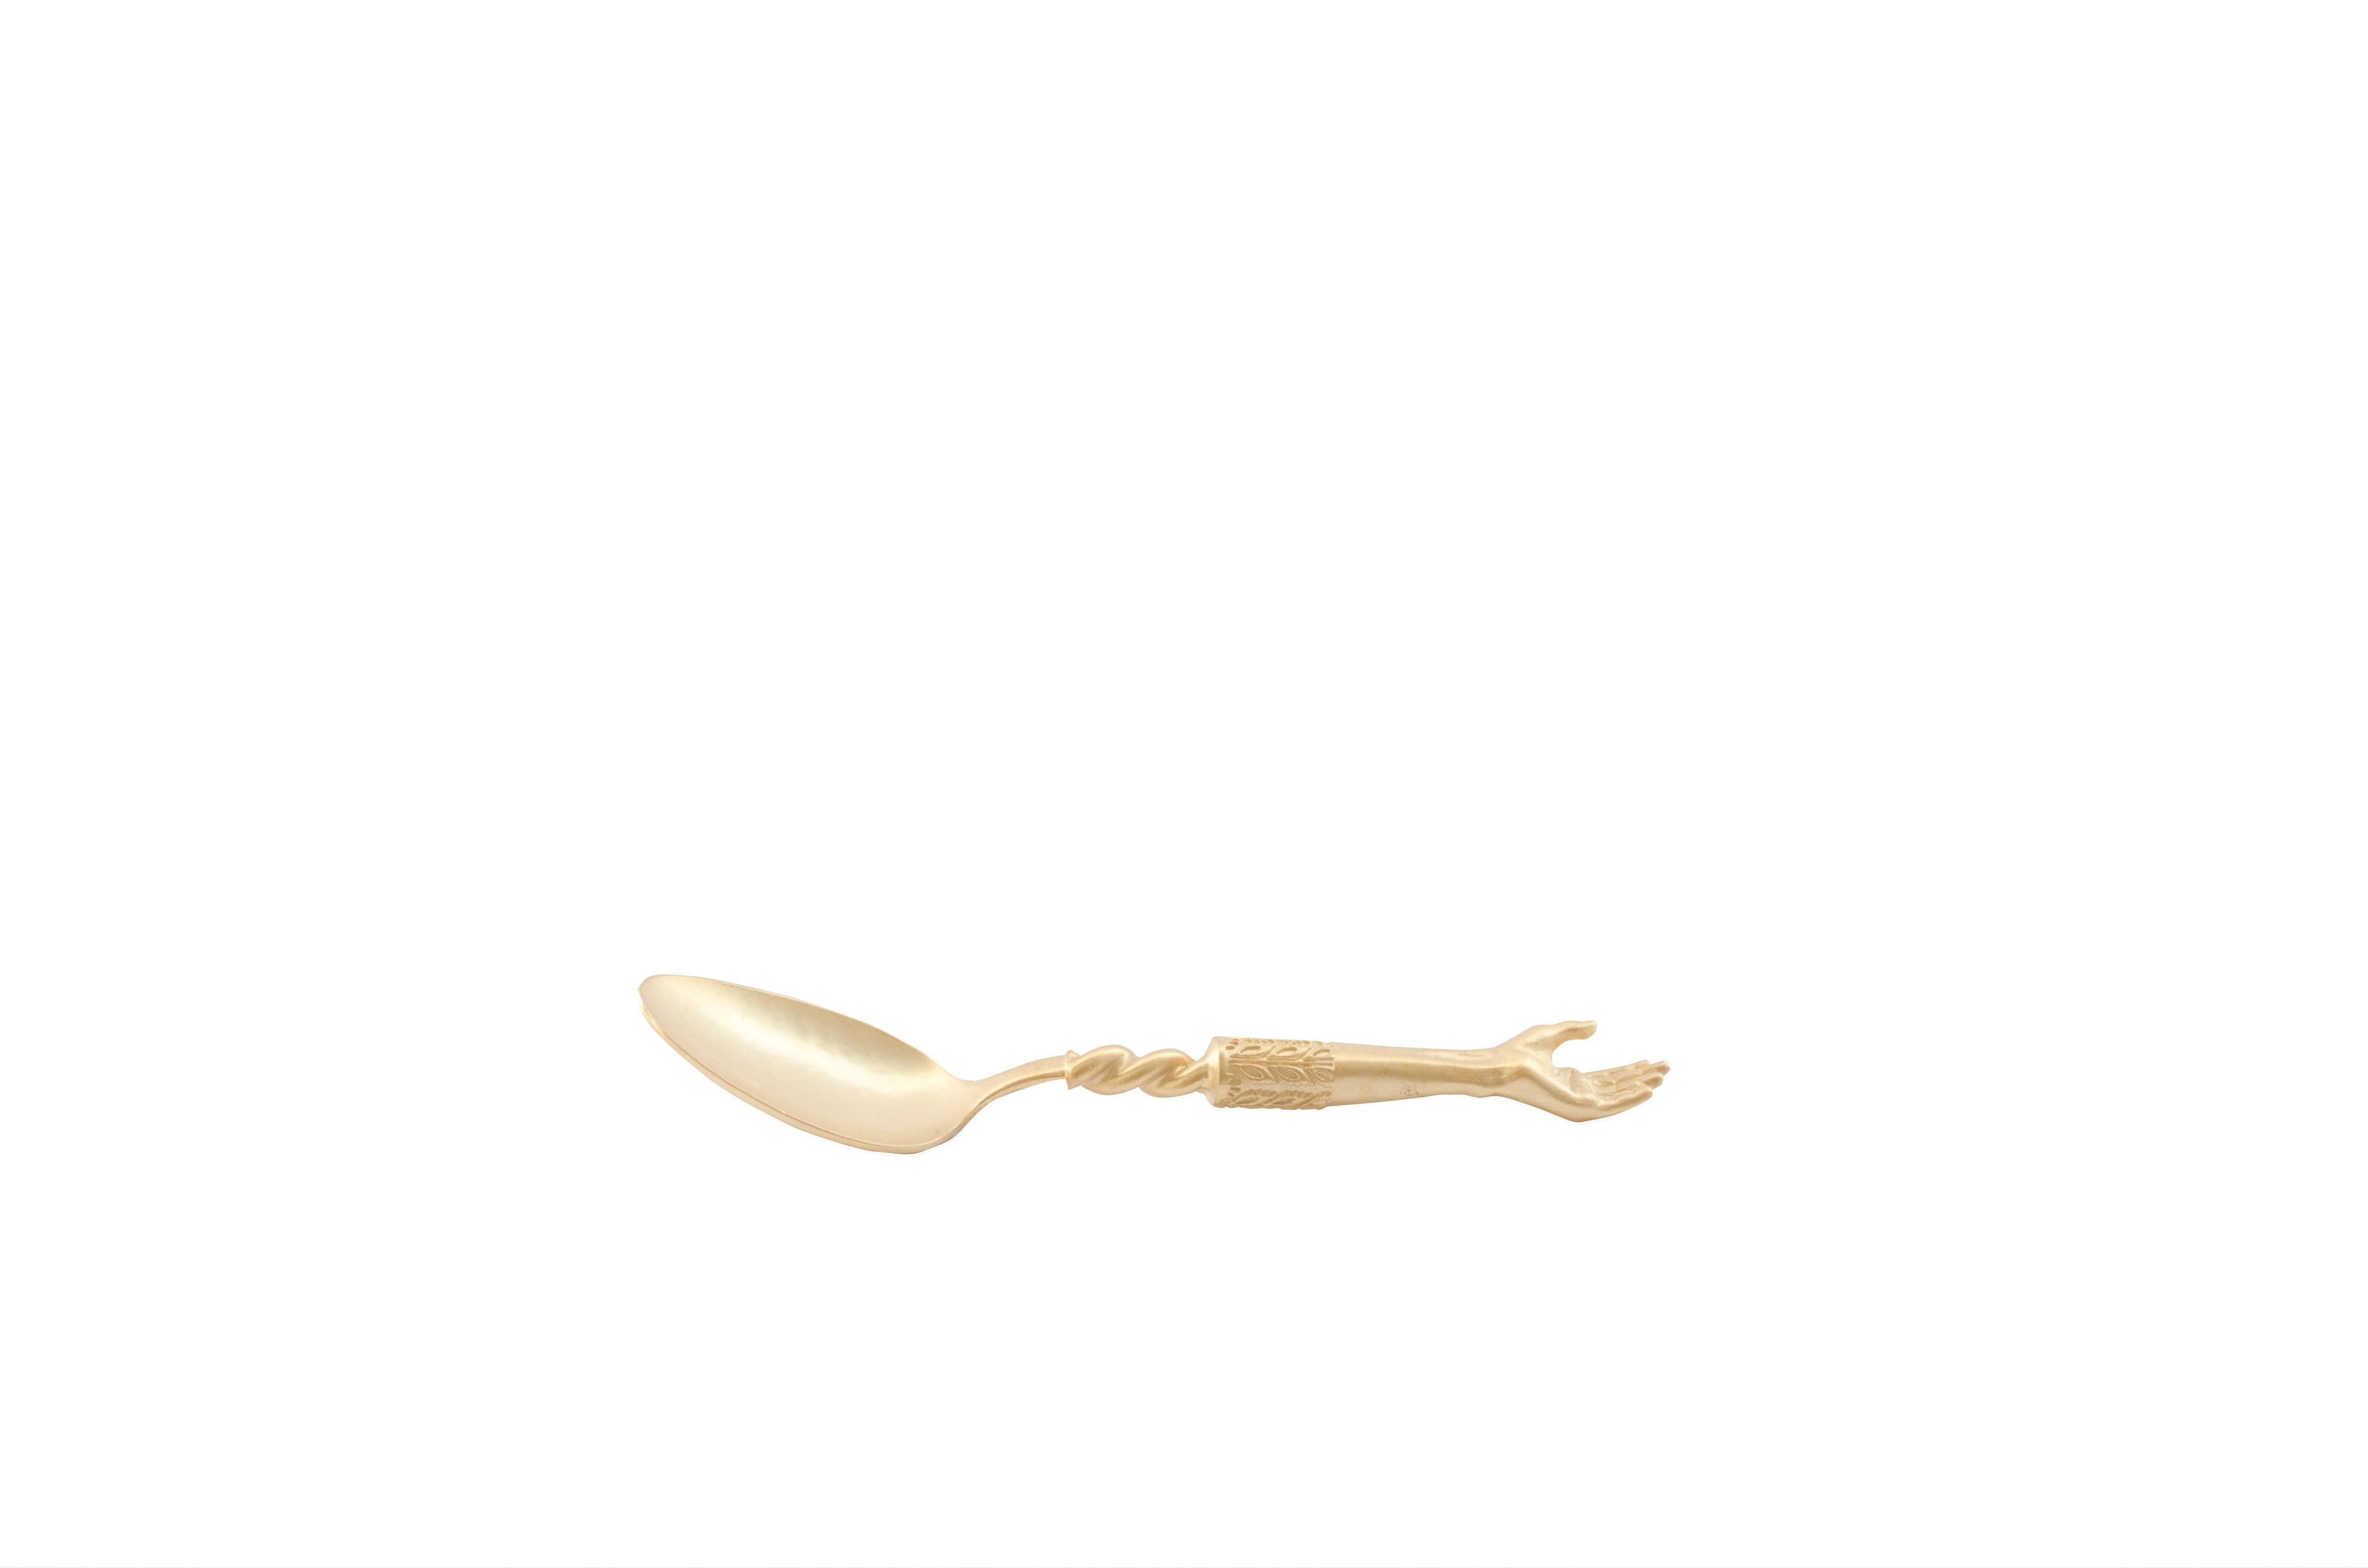 Italian Golden Plated Hand Tea Spoon Set of Two Handcrafted Natalia Criado For Sale